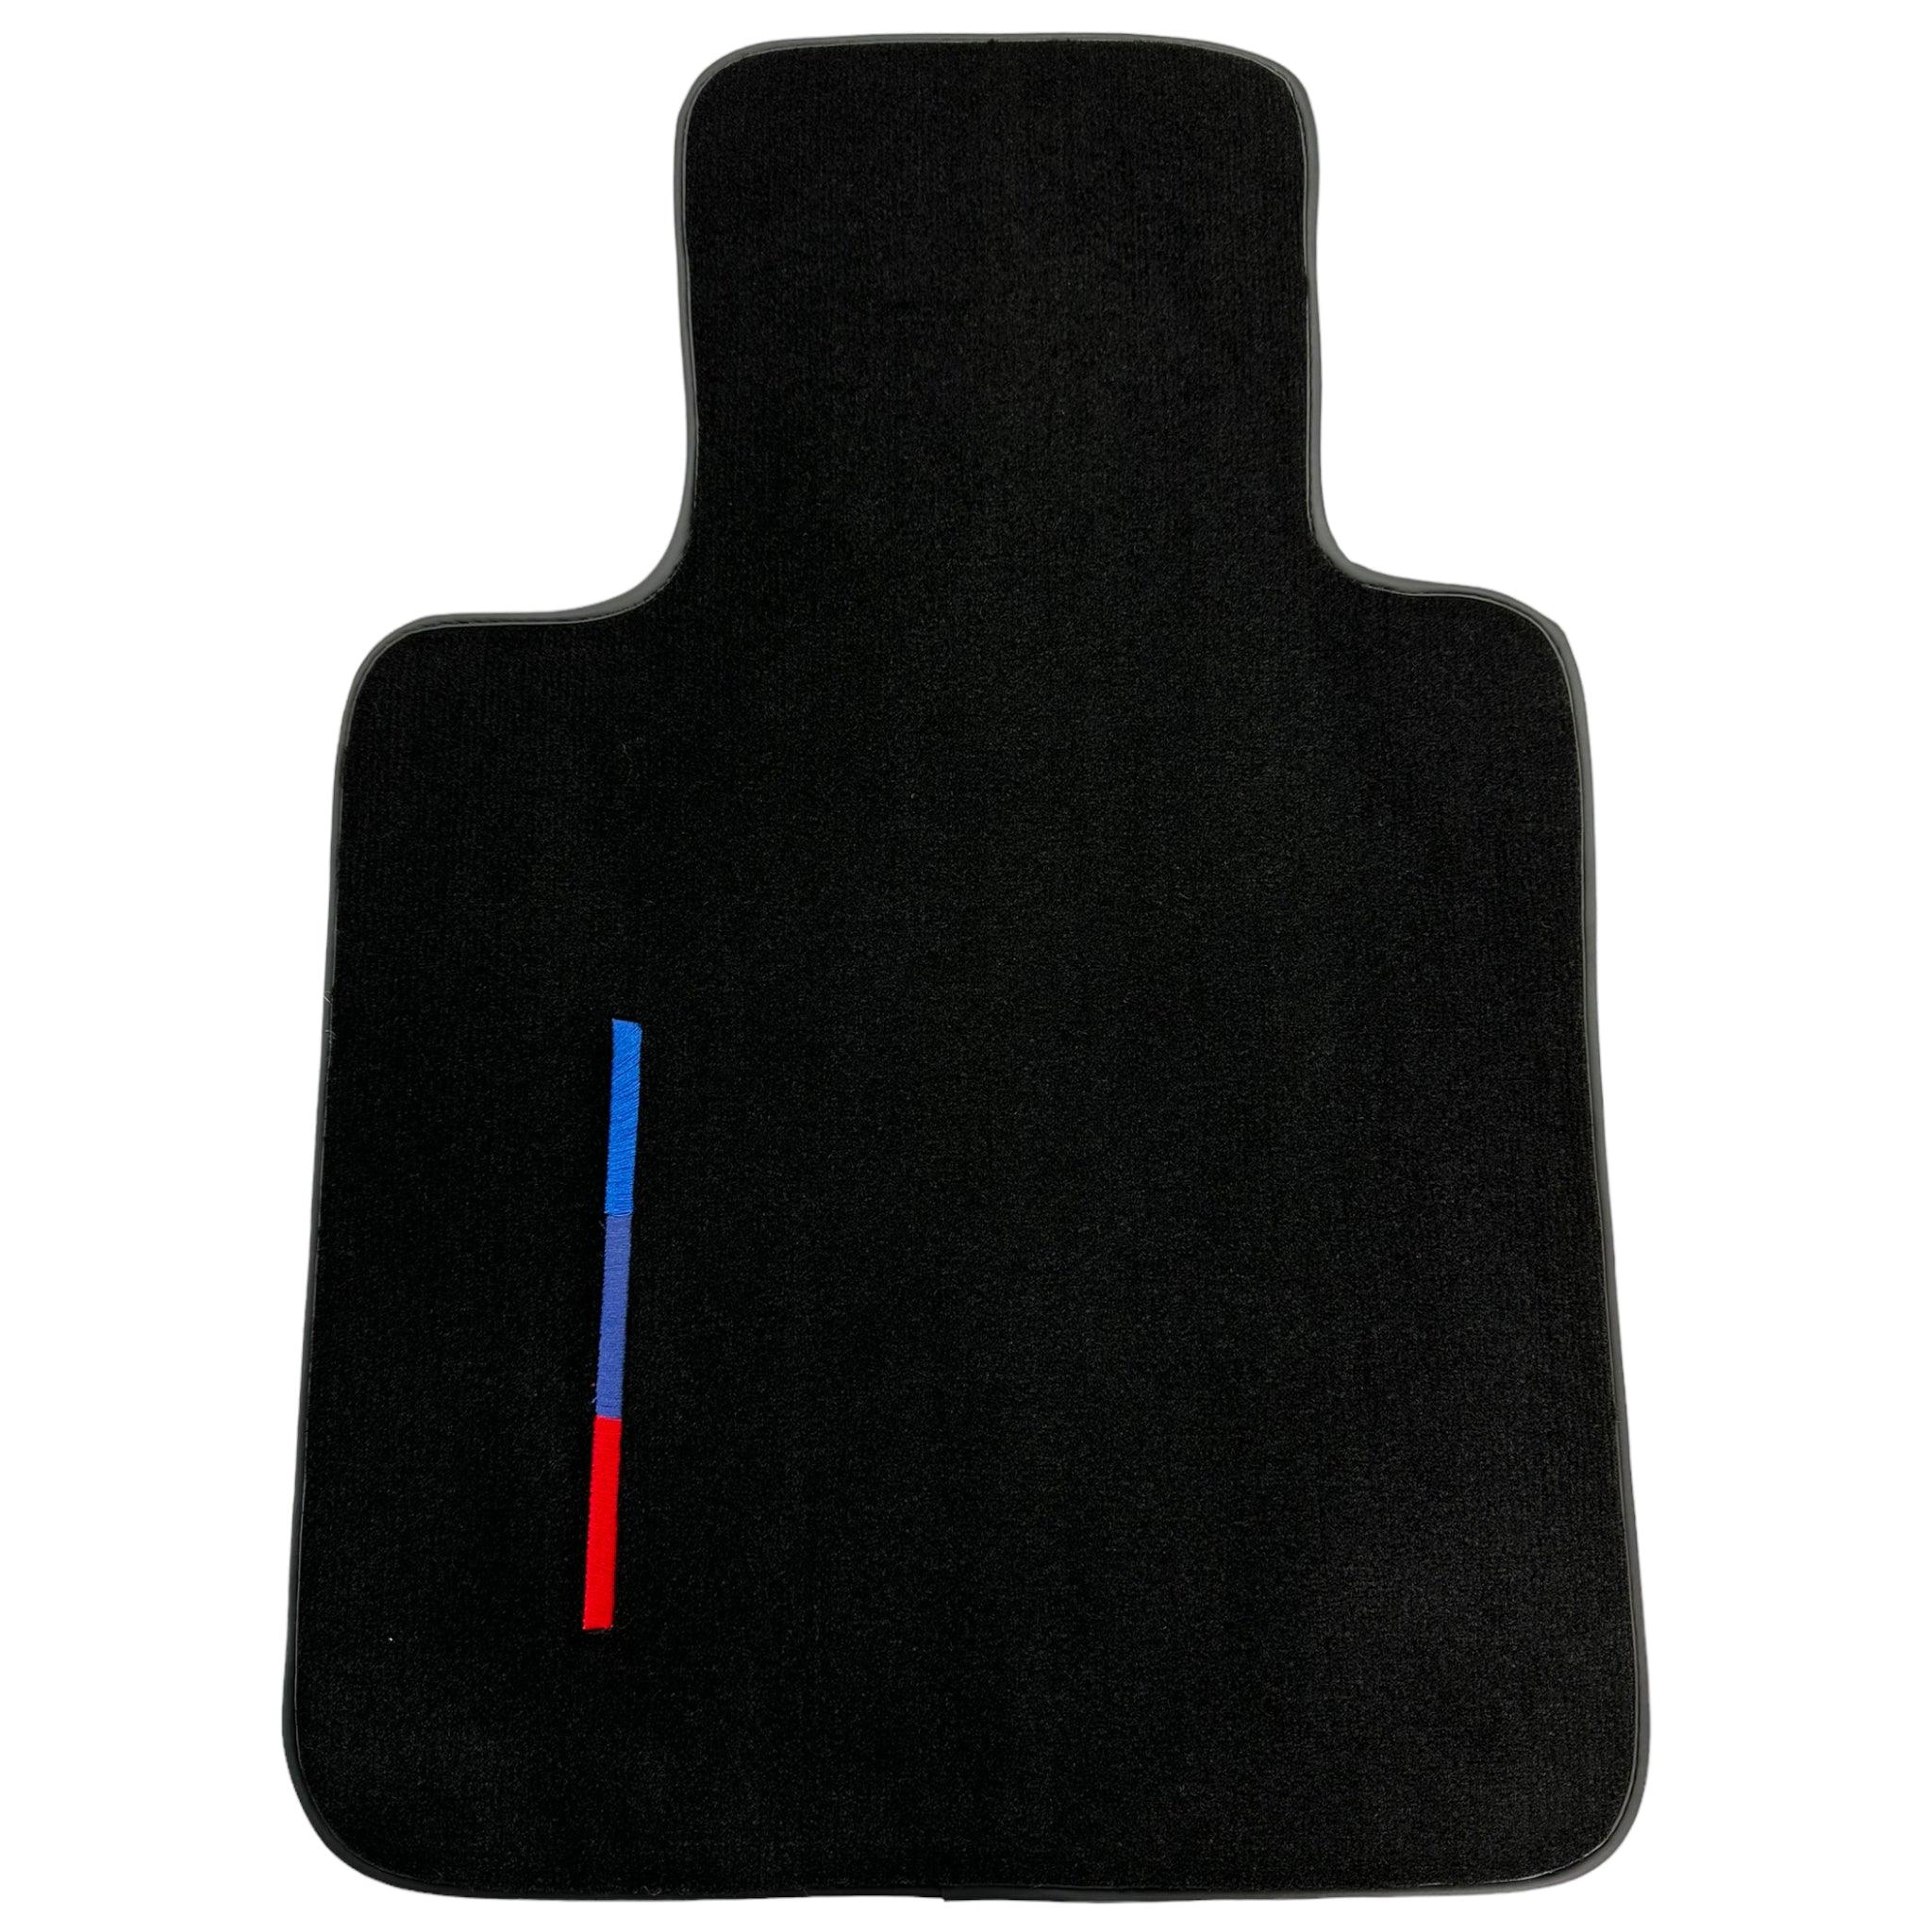 Black Floor Mats For BMW Z4 Series E89 With Color Stripes Tailored Set Perfect Fit - AutoWin